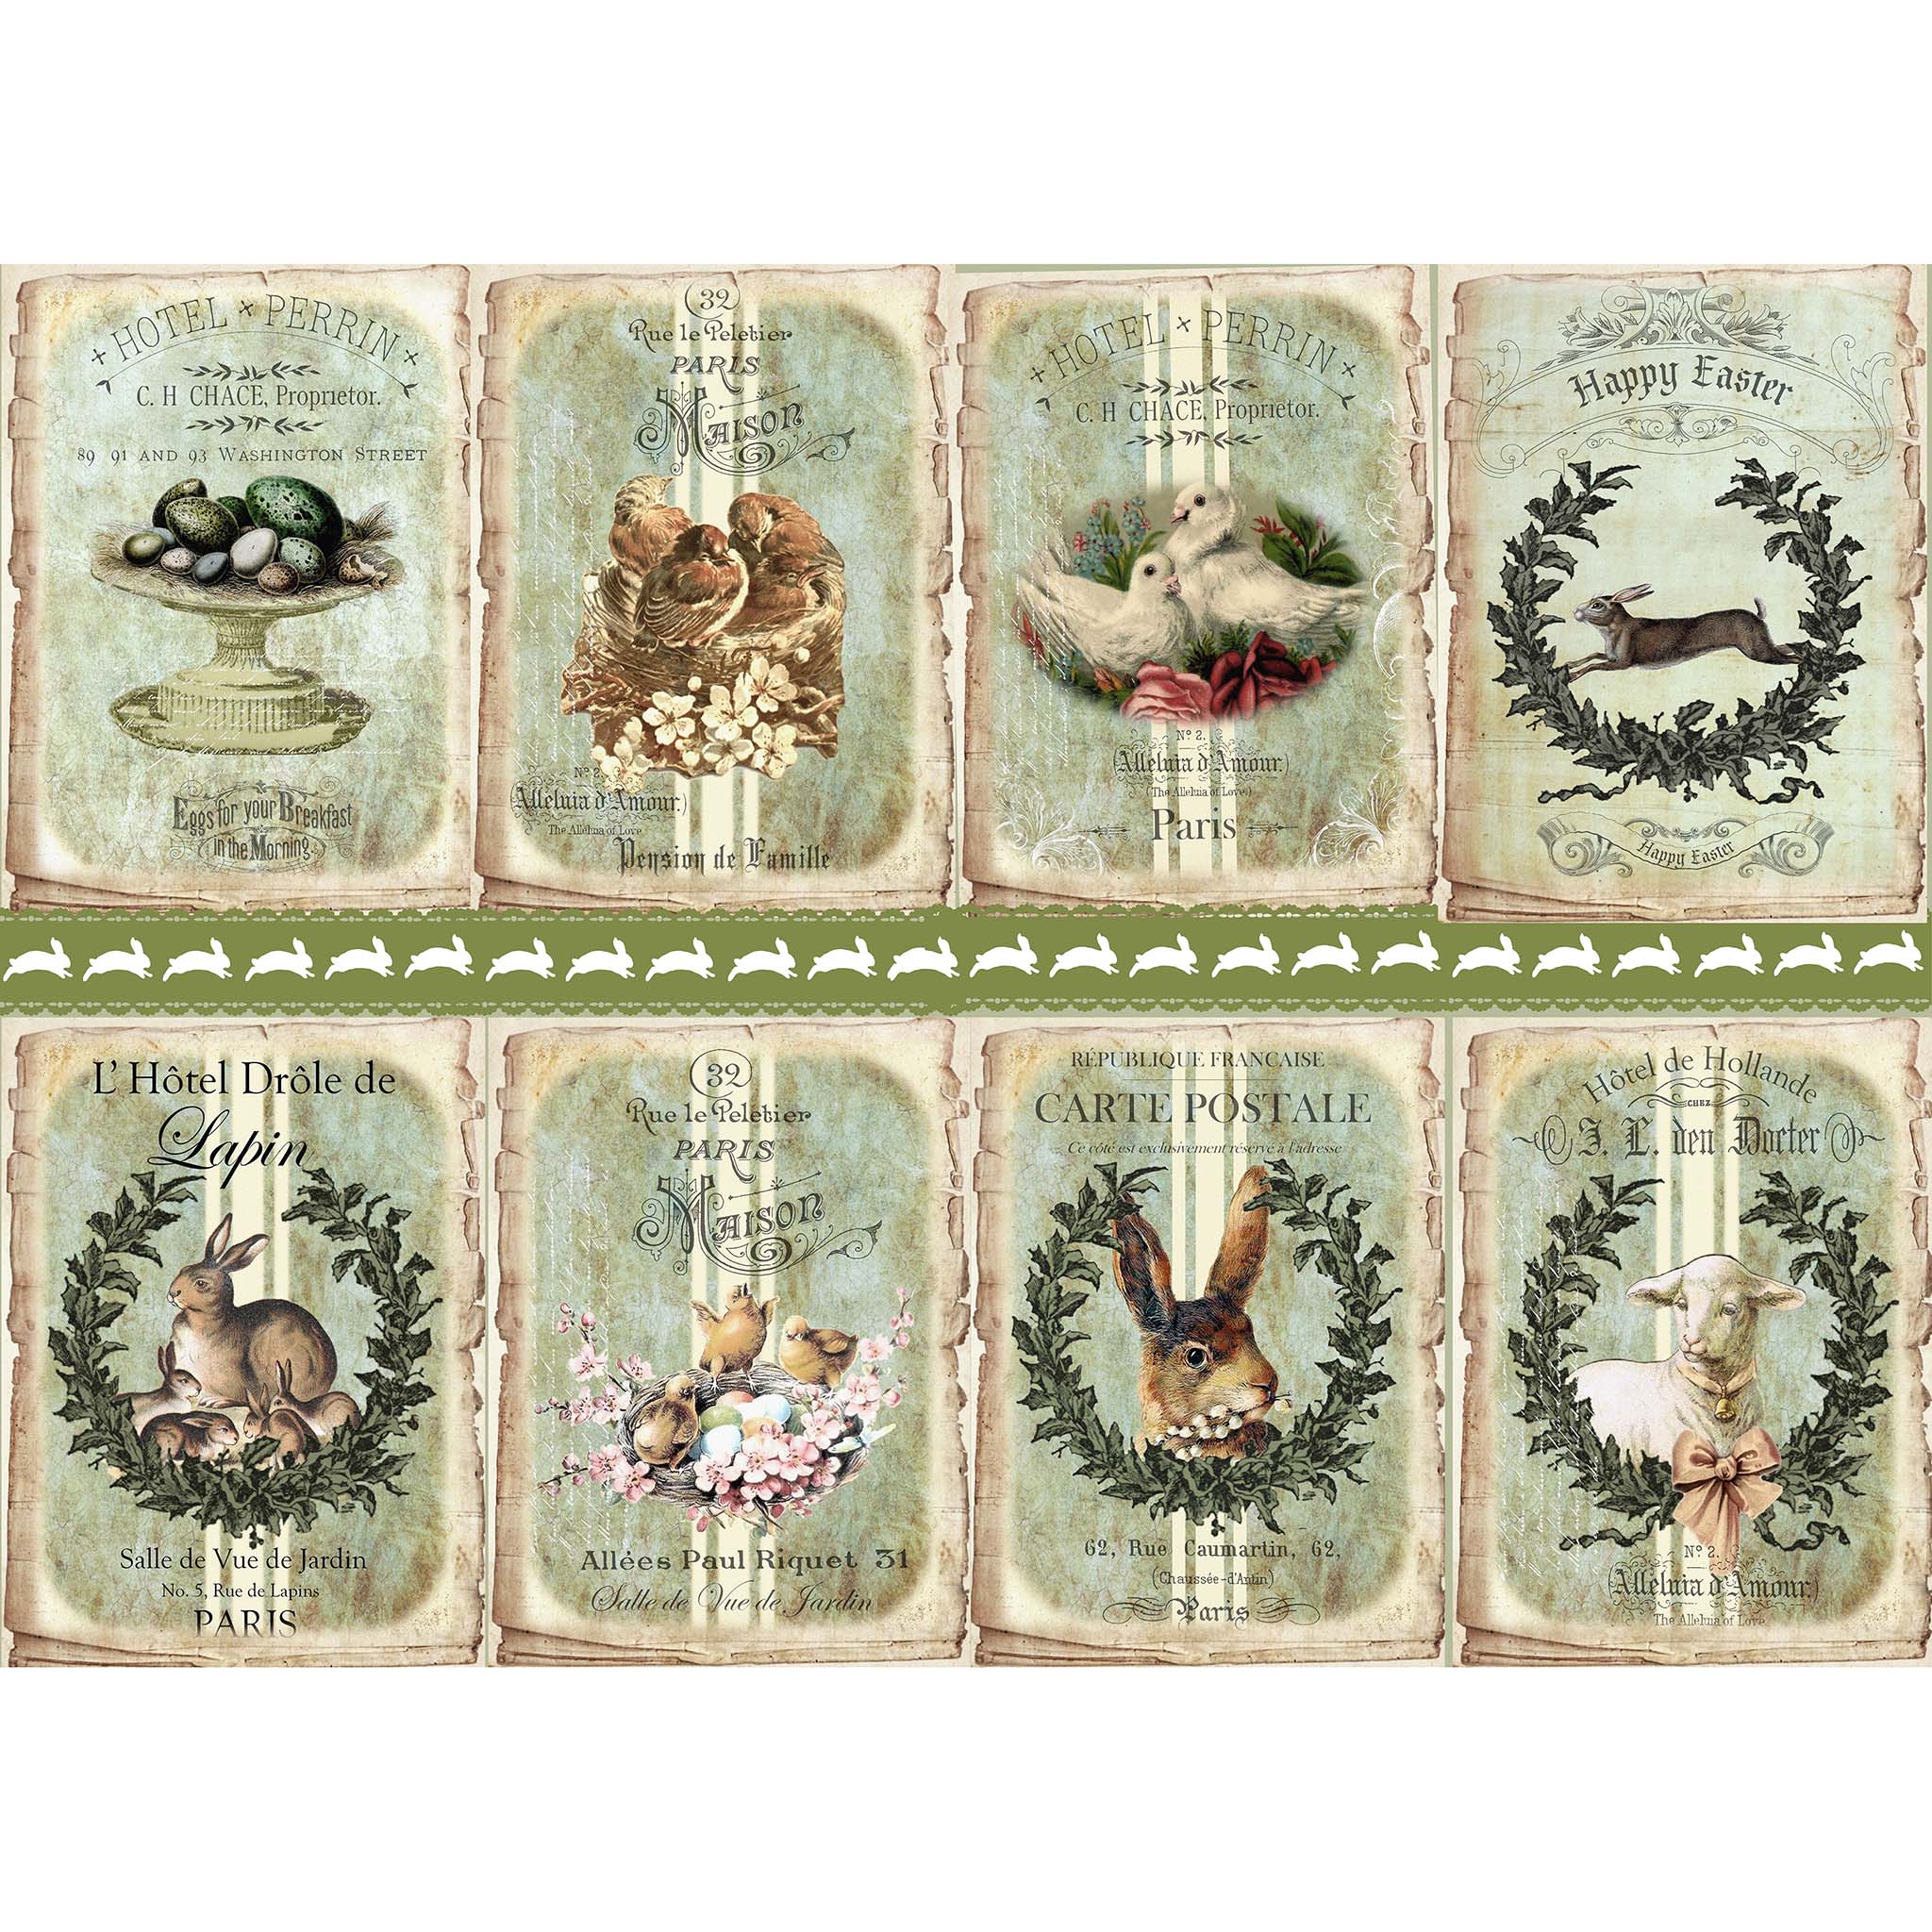 Tissue paper design that features 8 adorable images of birds, eggs, lambs, and bunnies on green backgrounds with French script. White borders are on the top and bottom.